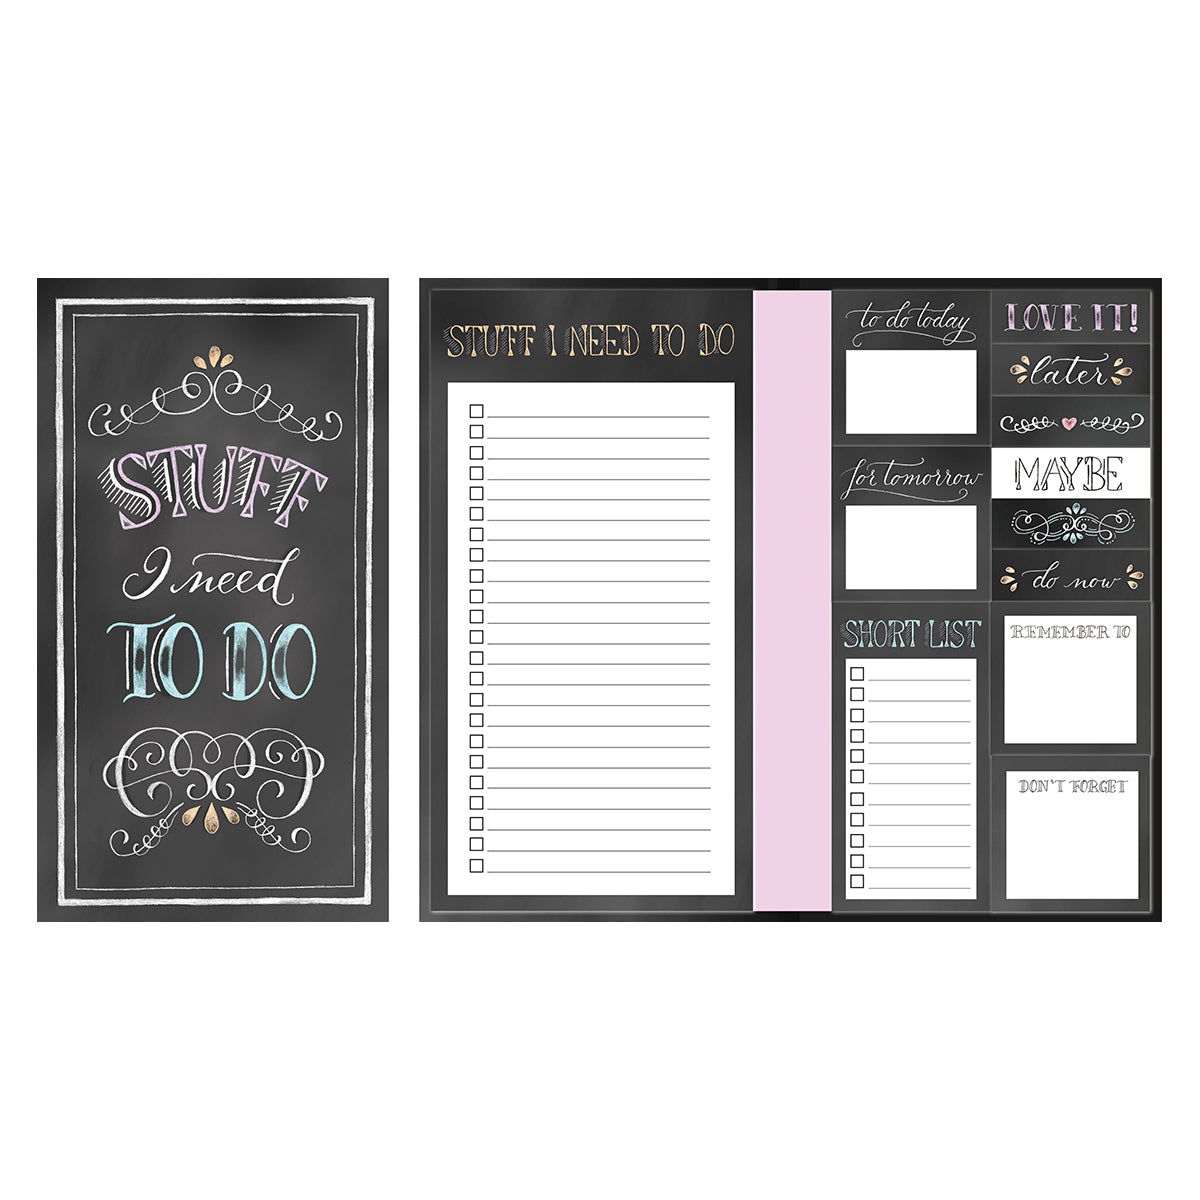 Book of Sticky Notes Stuff I Need to Do Chalkboard